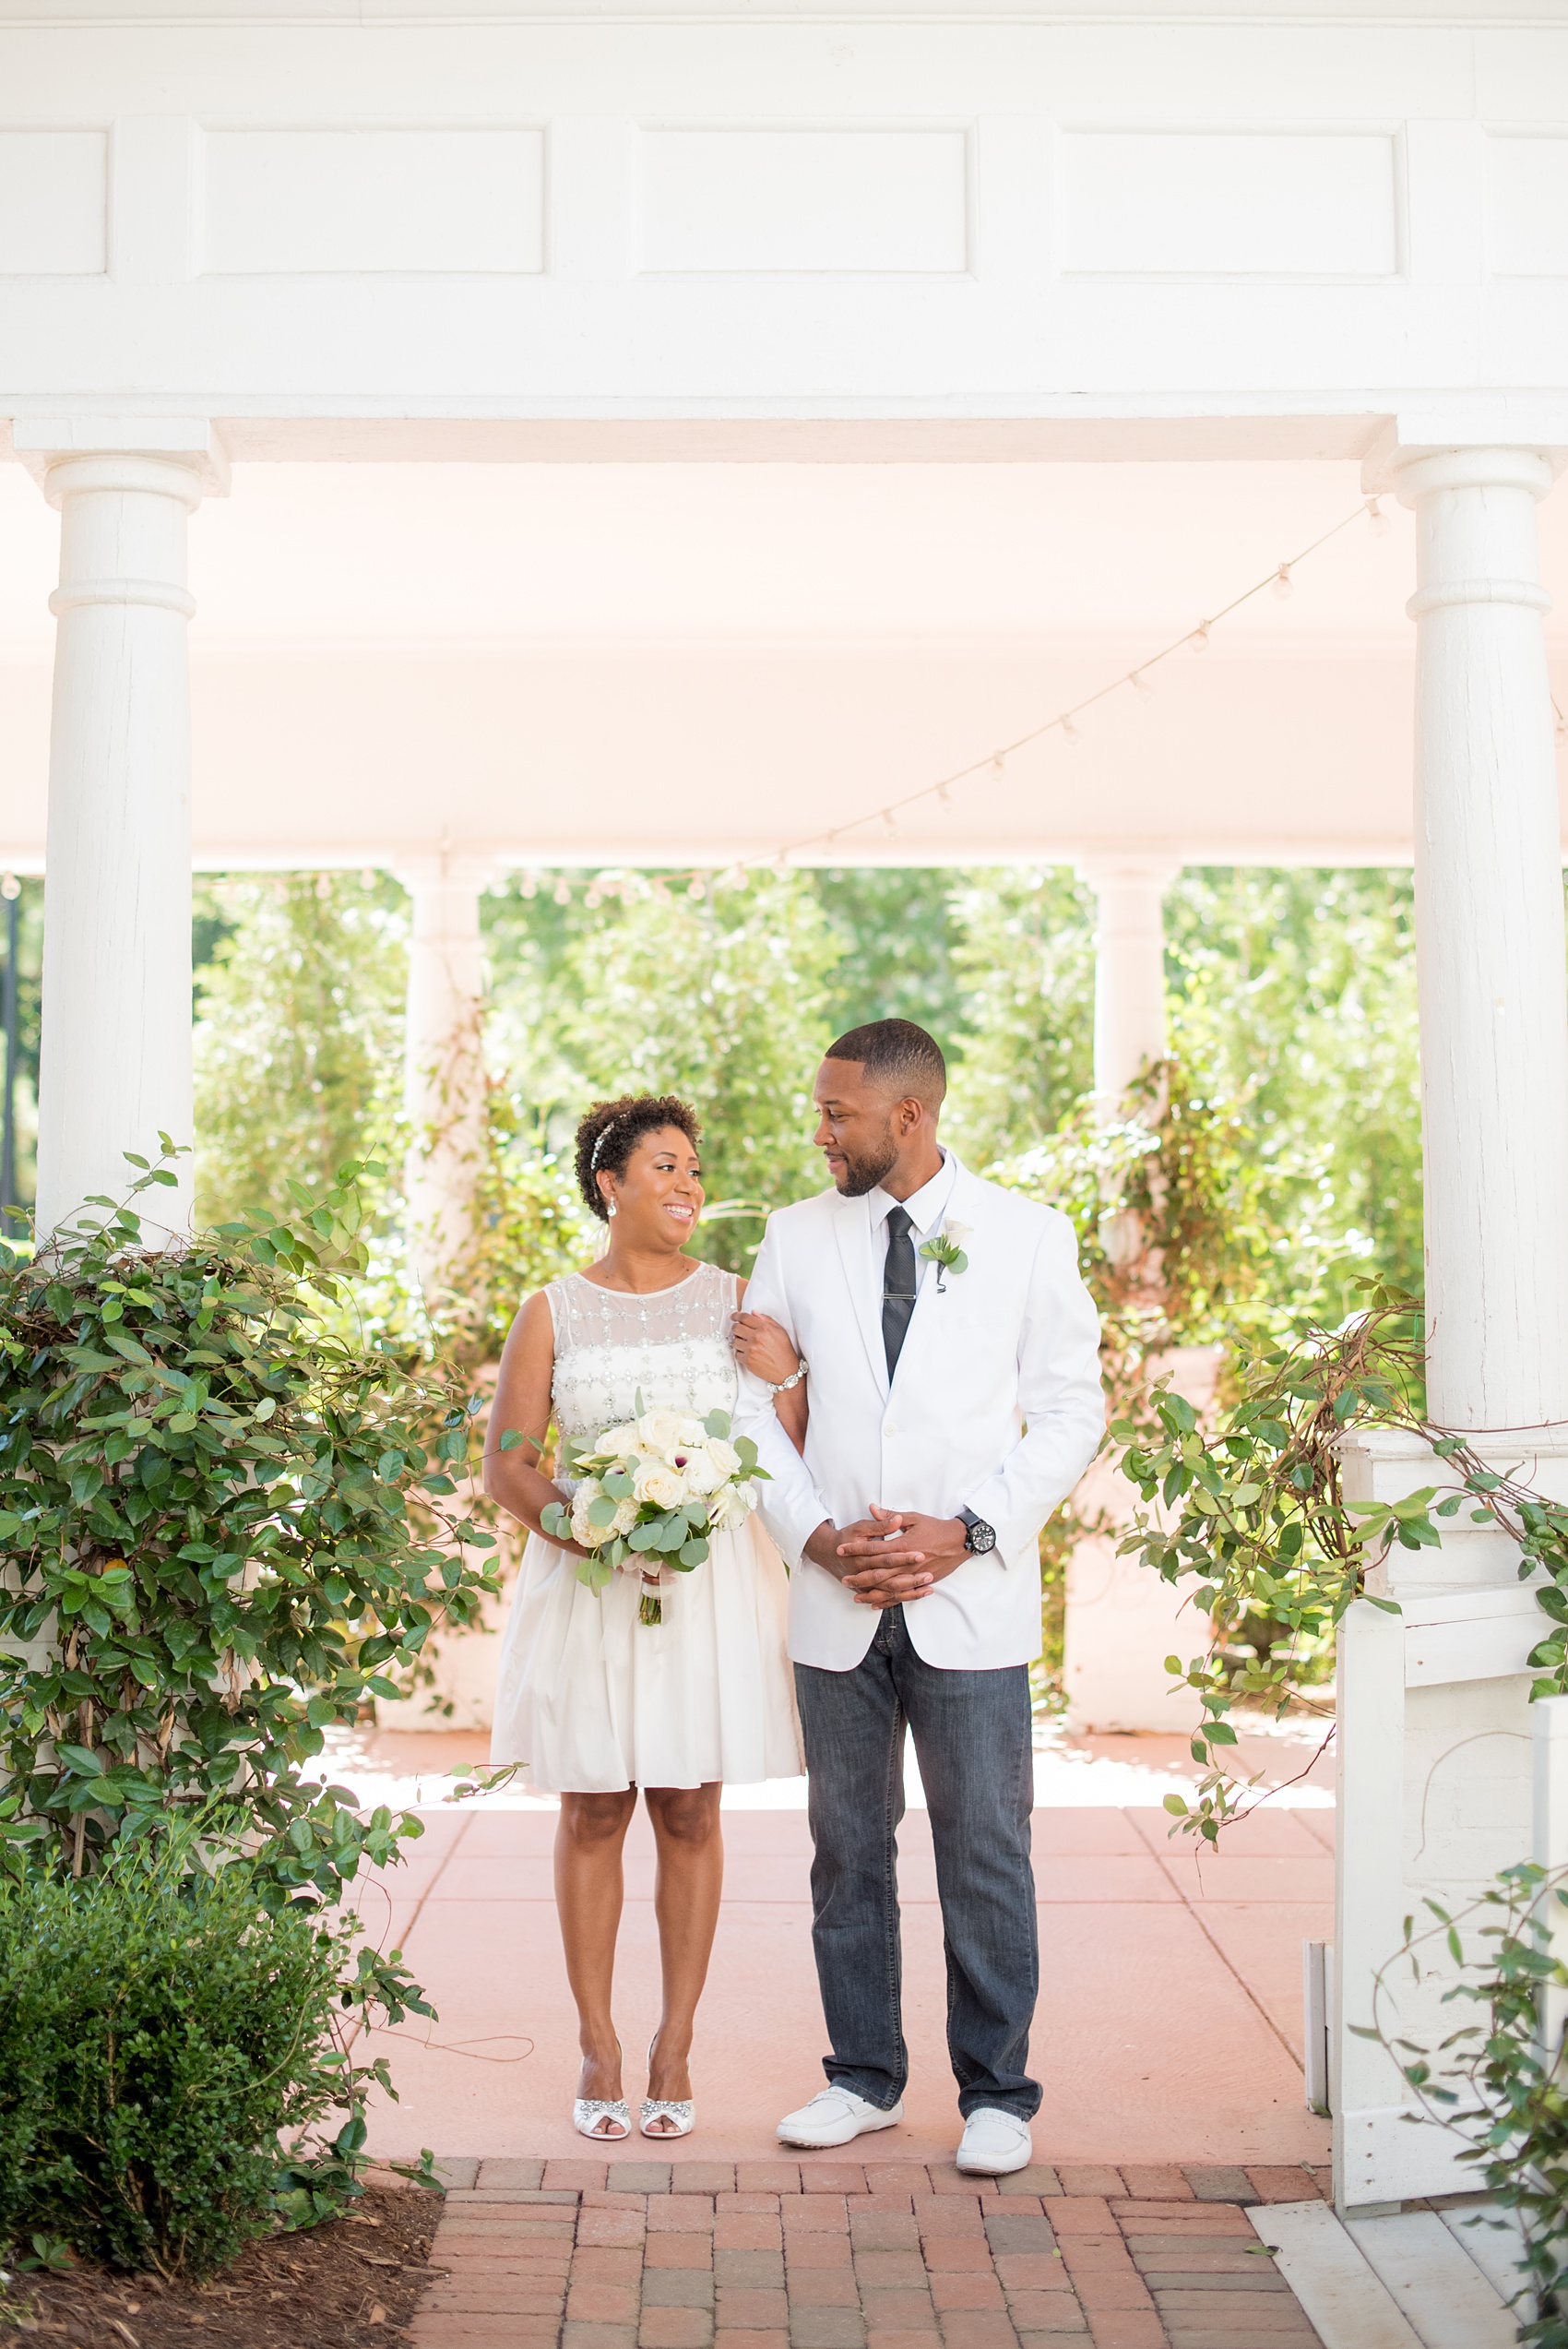 Mikkel Paige Photography pictures of a wedding at Leslie-Alford Mim's House in North Carolina for a Mad Dash Weddings event. Photo of the bride and groom in casual elopement attire.